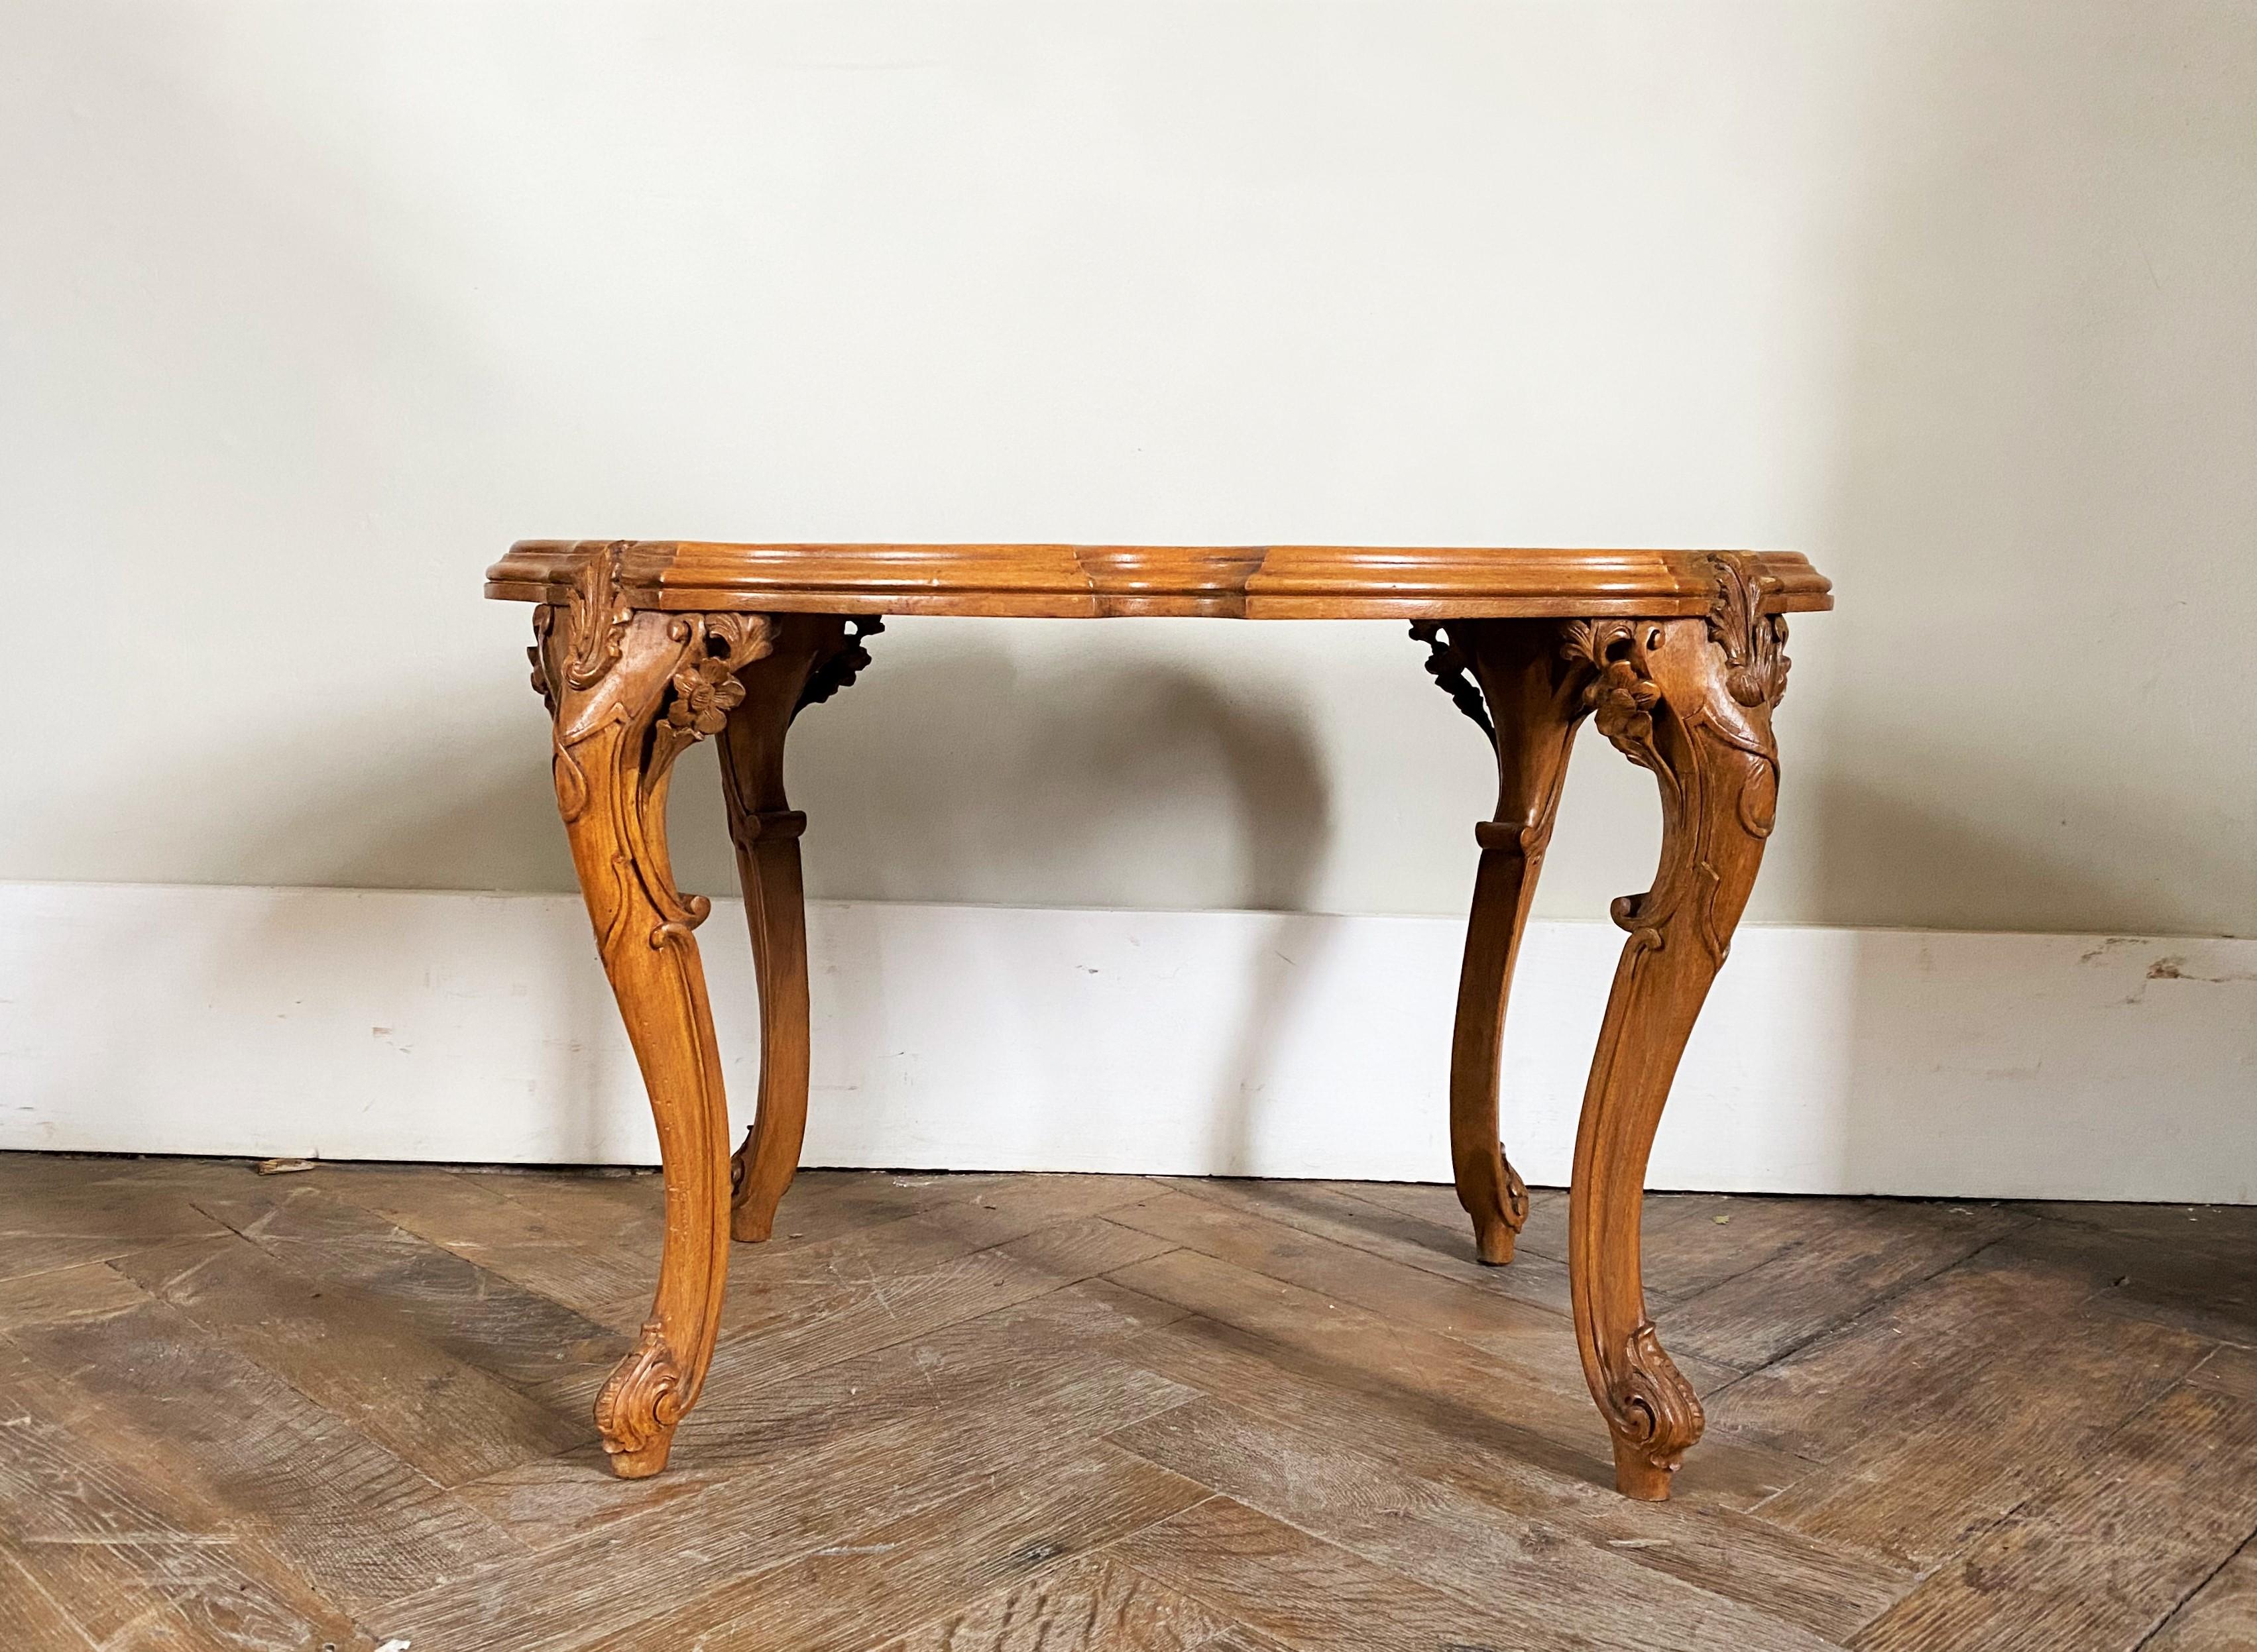 Very elegant Louis XV style coffee table. The violin-shaped top is covered with a beautiful burl walnut veneer. The arched beech legs typical of the Louis XV style are finely carved with scrolls and foliage. This pretty little table is ideal as a